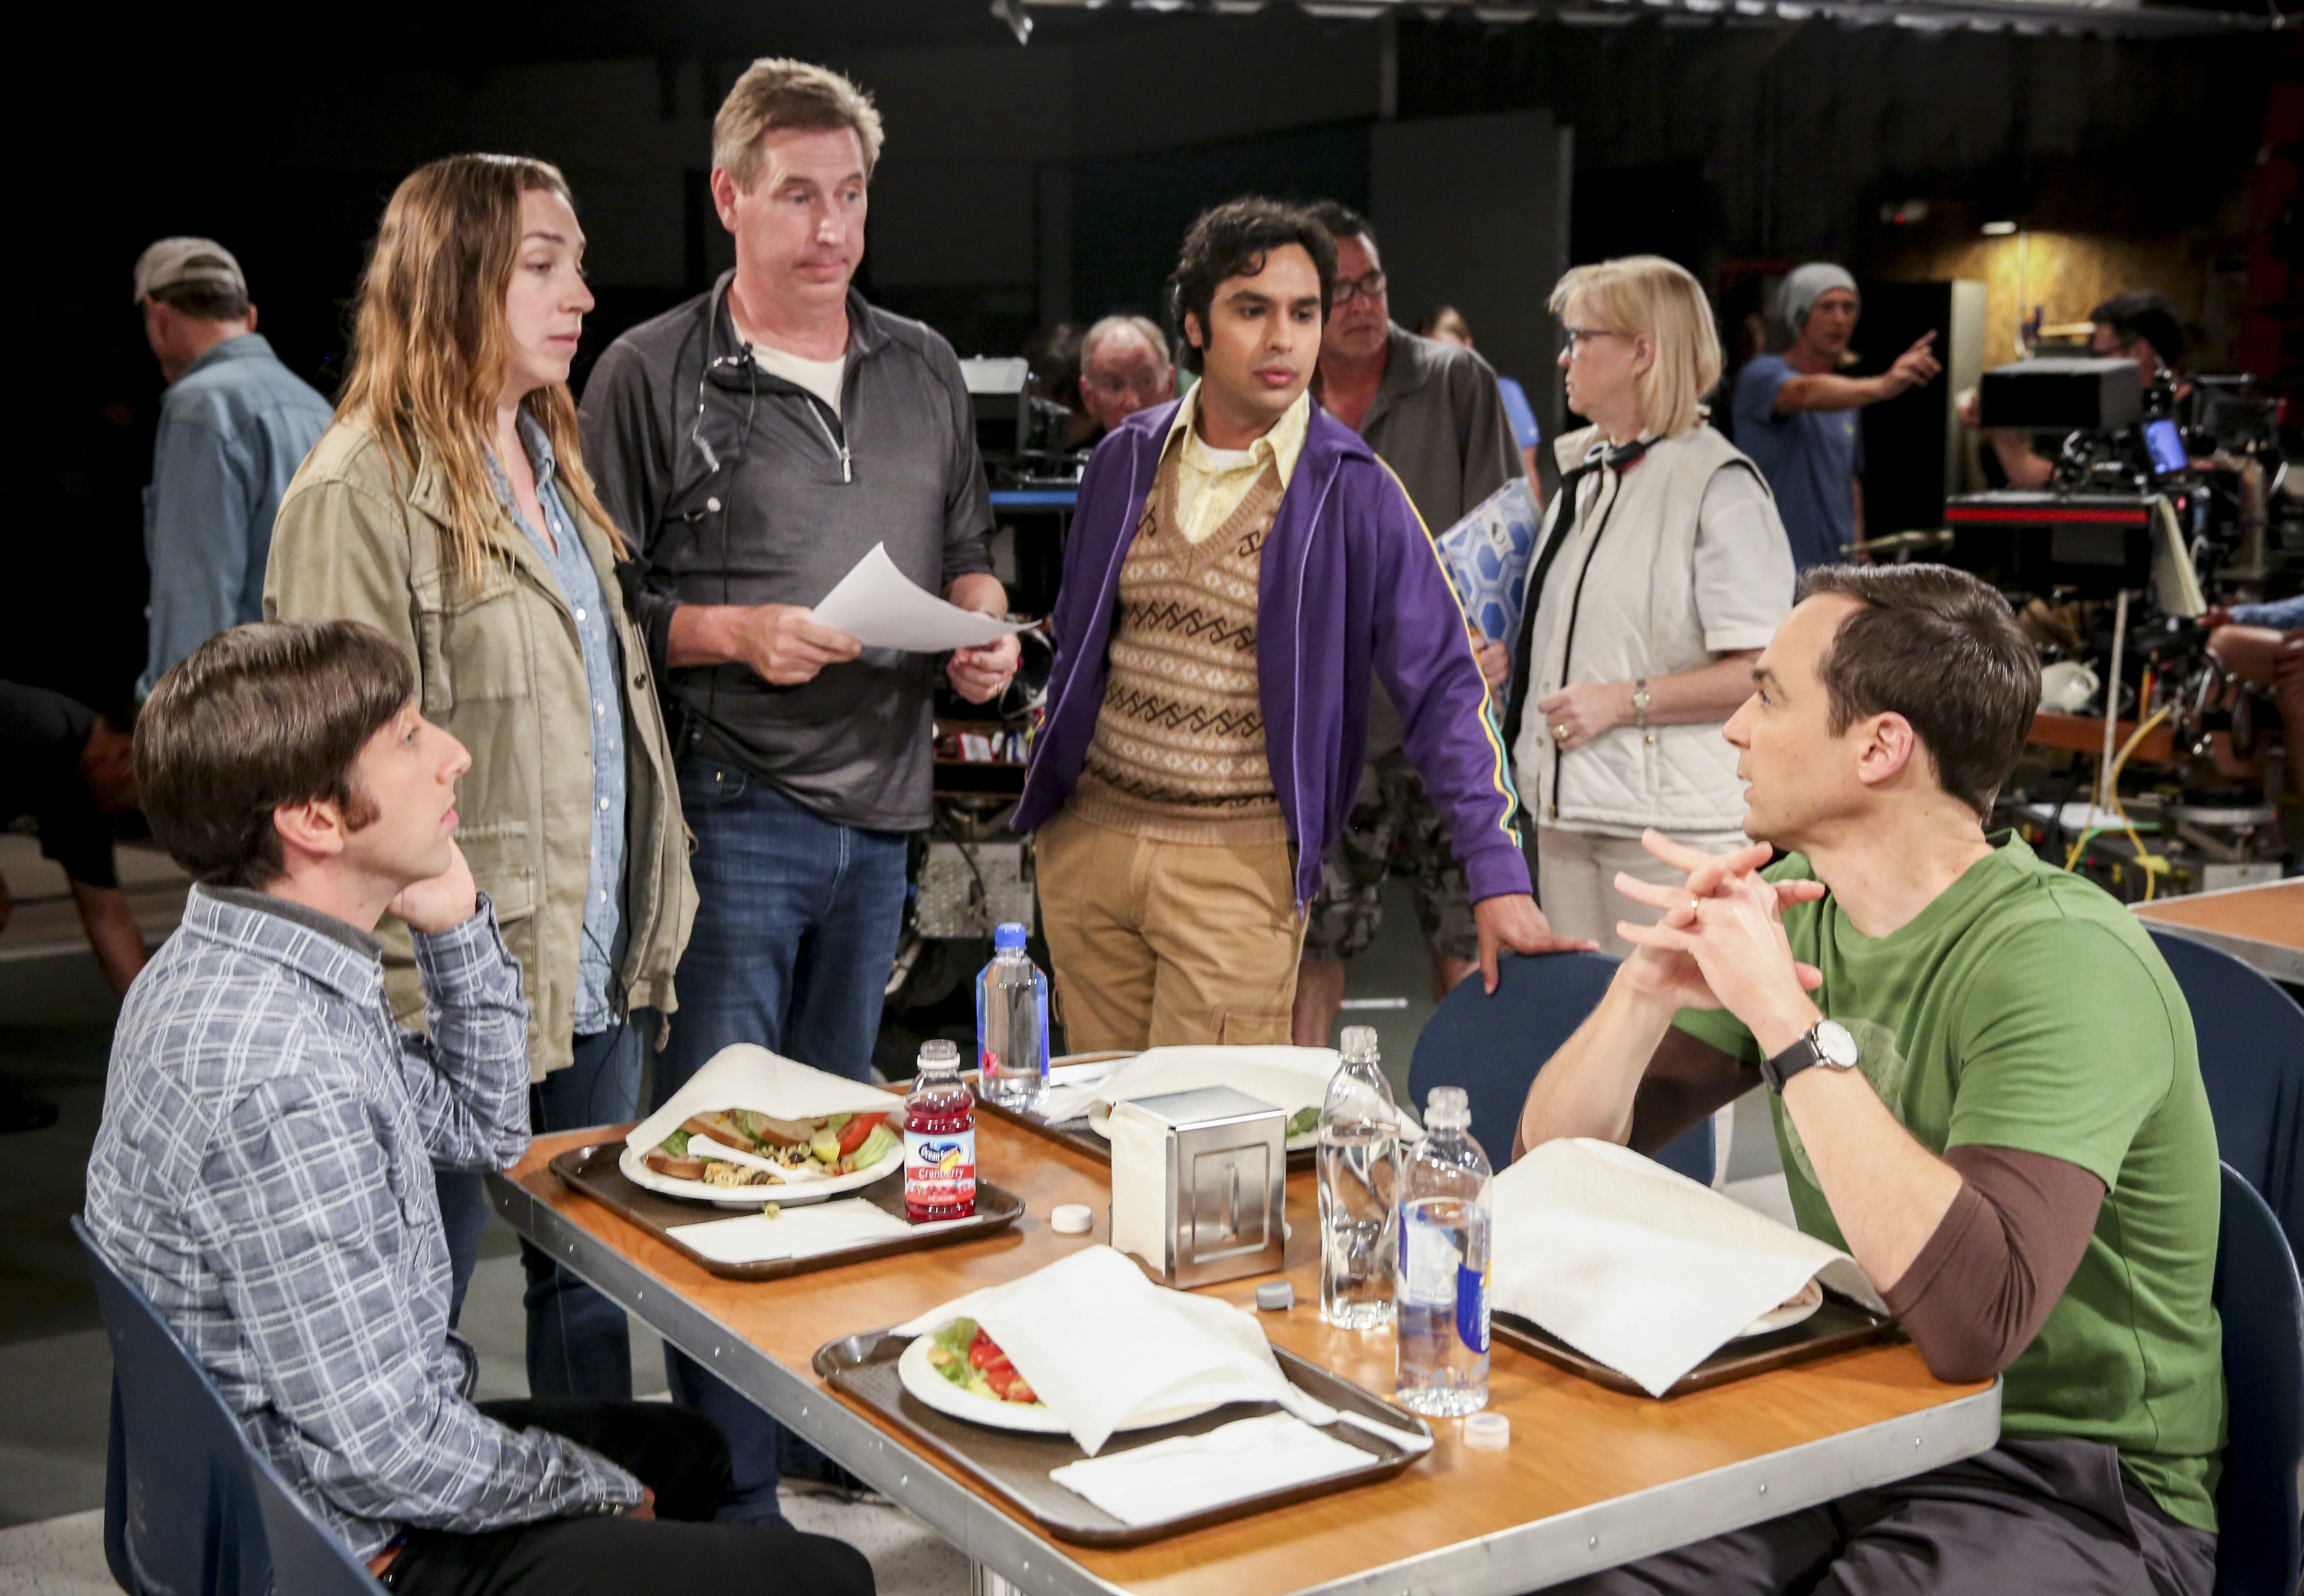 “The Procreation Calculation” – Pictured Behind the Scenes: Howard Wolowitz (Simon Helberg), Mark Cendrowski, Rajesh Koothrappali (Kunal Nayyar) and Sheldon Cooper (Jim Parsons).  The Wolowitzes’ life gets complicated when Stuart starts bringing his new girlfriend home. Also, Penny and Leonard talk about starting a family while Koothrappali explores an arranged marriage, on THE BIG BANG THEORY, Thursday, Oct. 4 (8:00-8:31 PM, ET/PT) on the CBS Television Network. Keith Carradine returns as Penny’s father, Wyatt. Photo: Michael Yarish/Warner Bros. Entertainment Inc. © 2018 WBEI. All rights reserved.